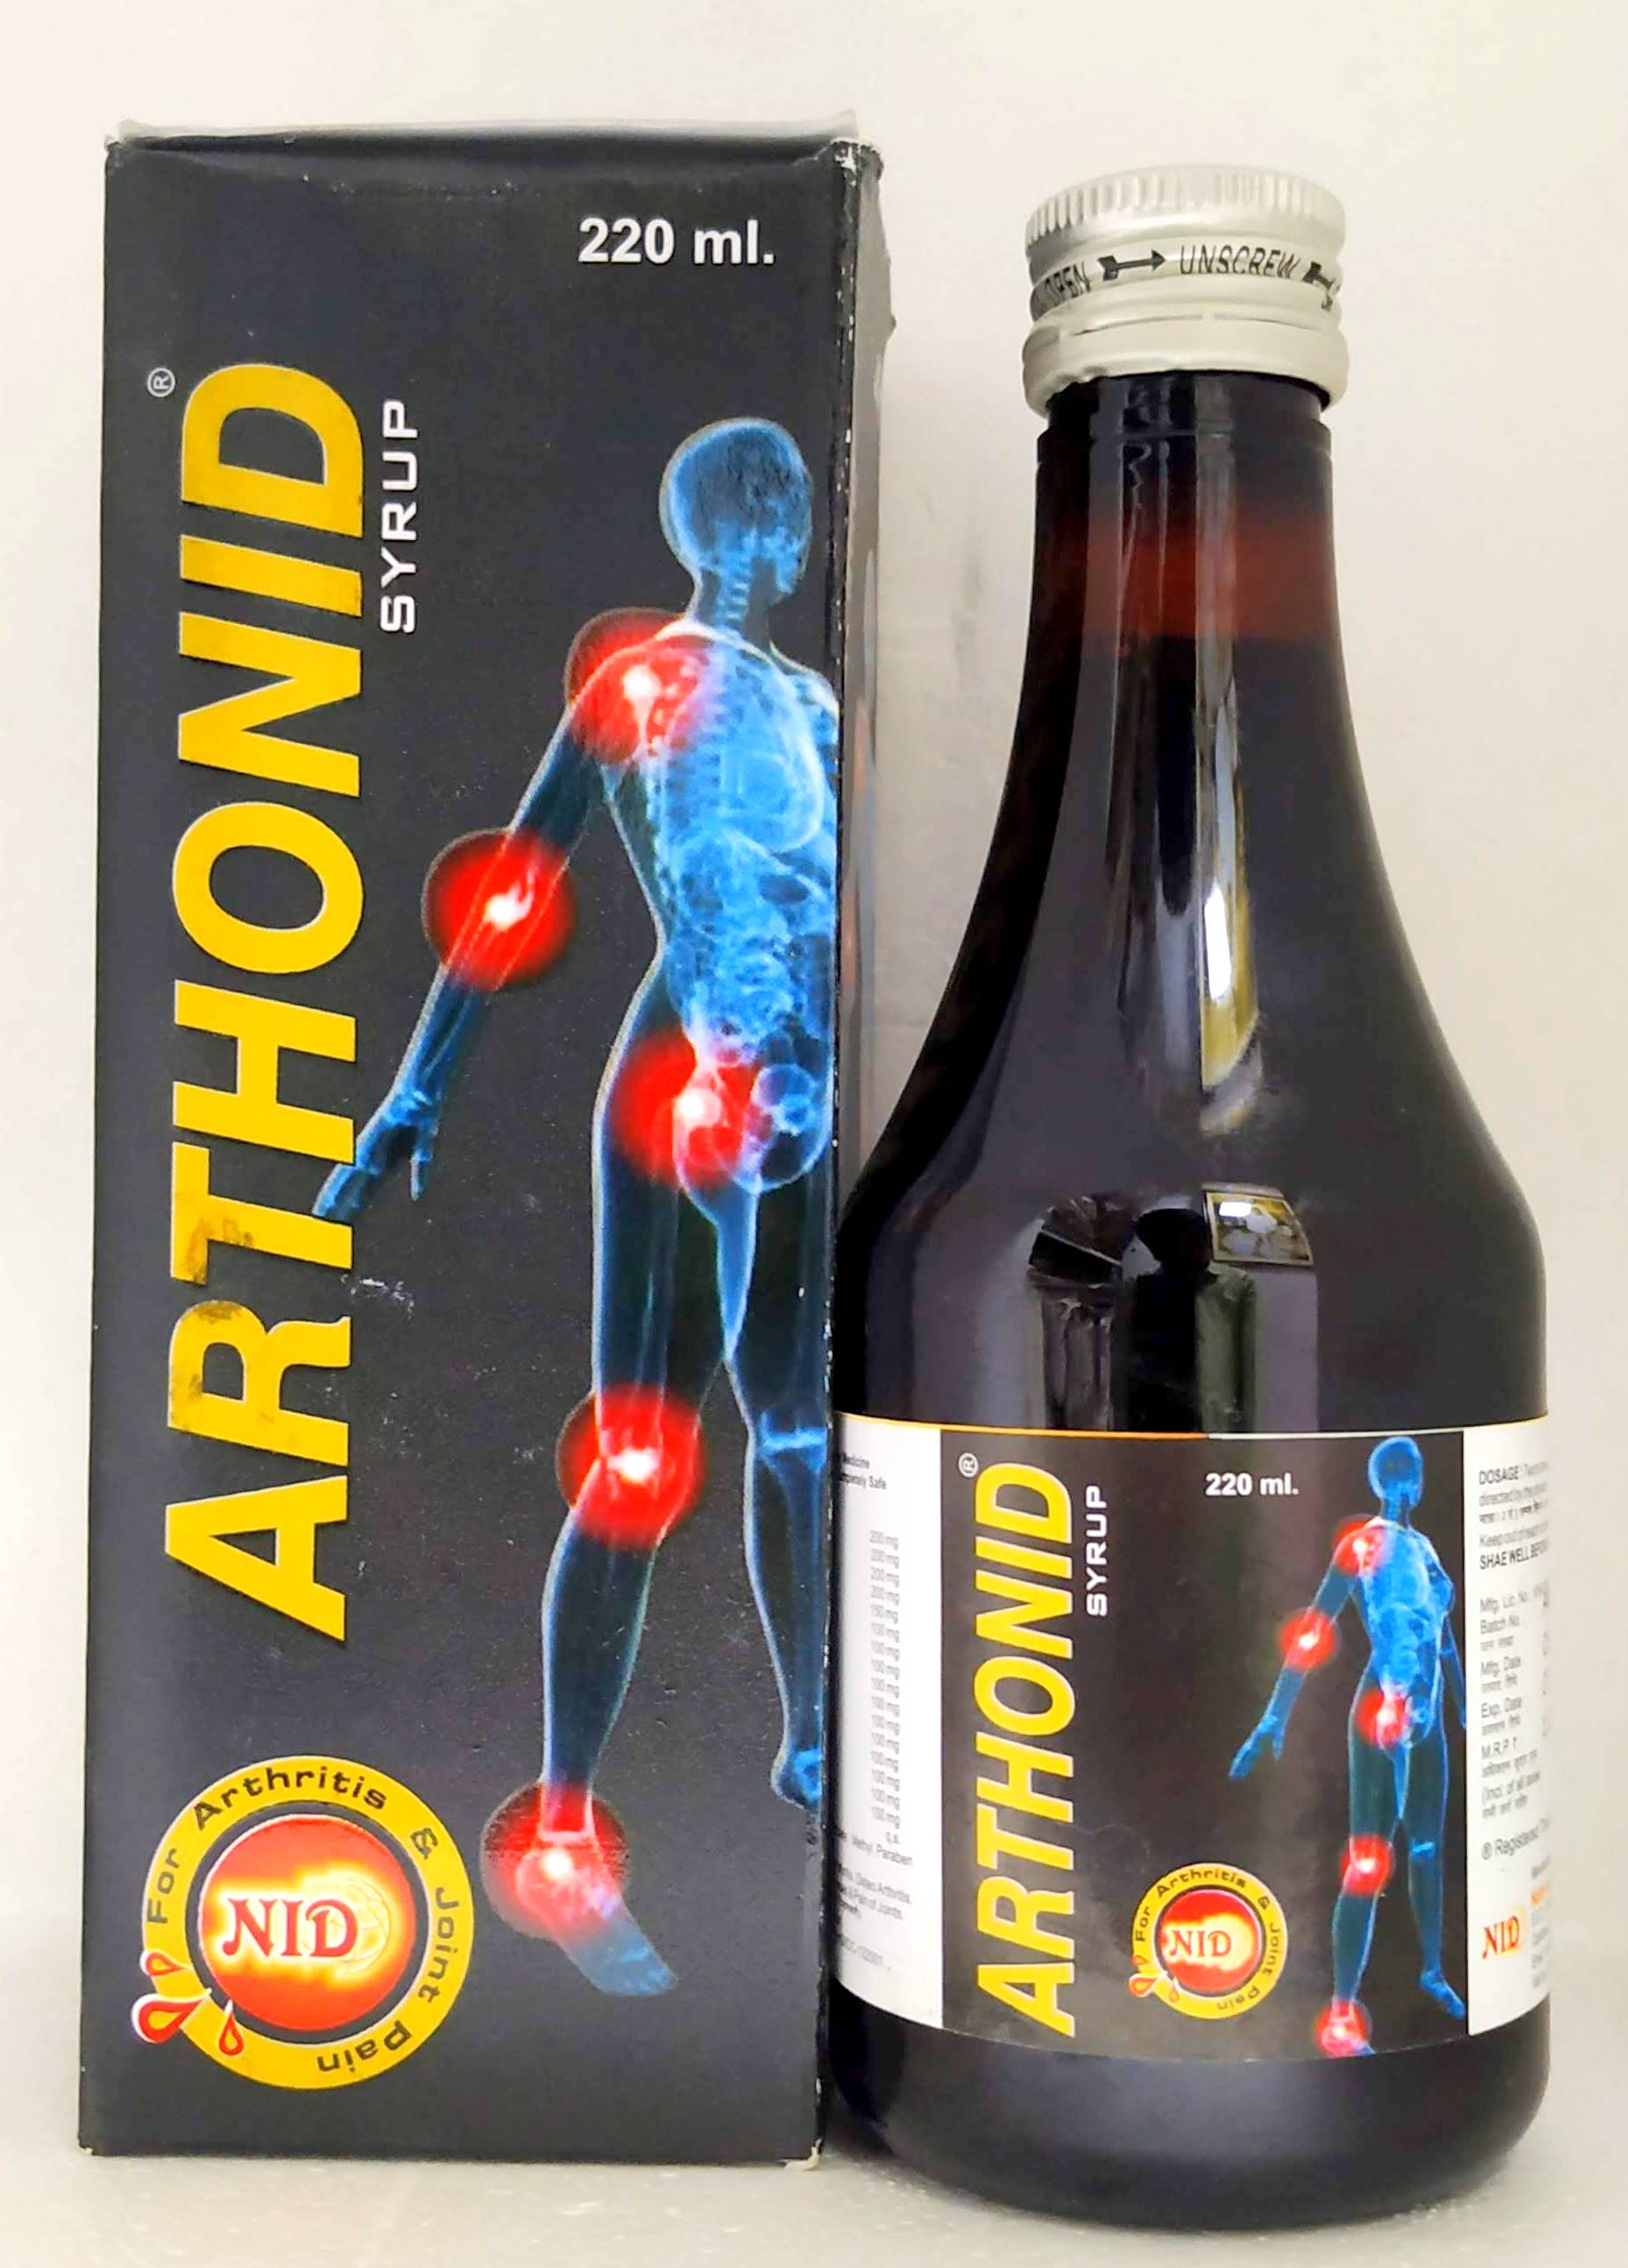 Shop Arthonid Syrup 220ml at price 110.00 from North India Online - Ayush Care